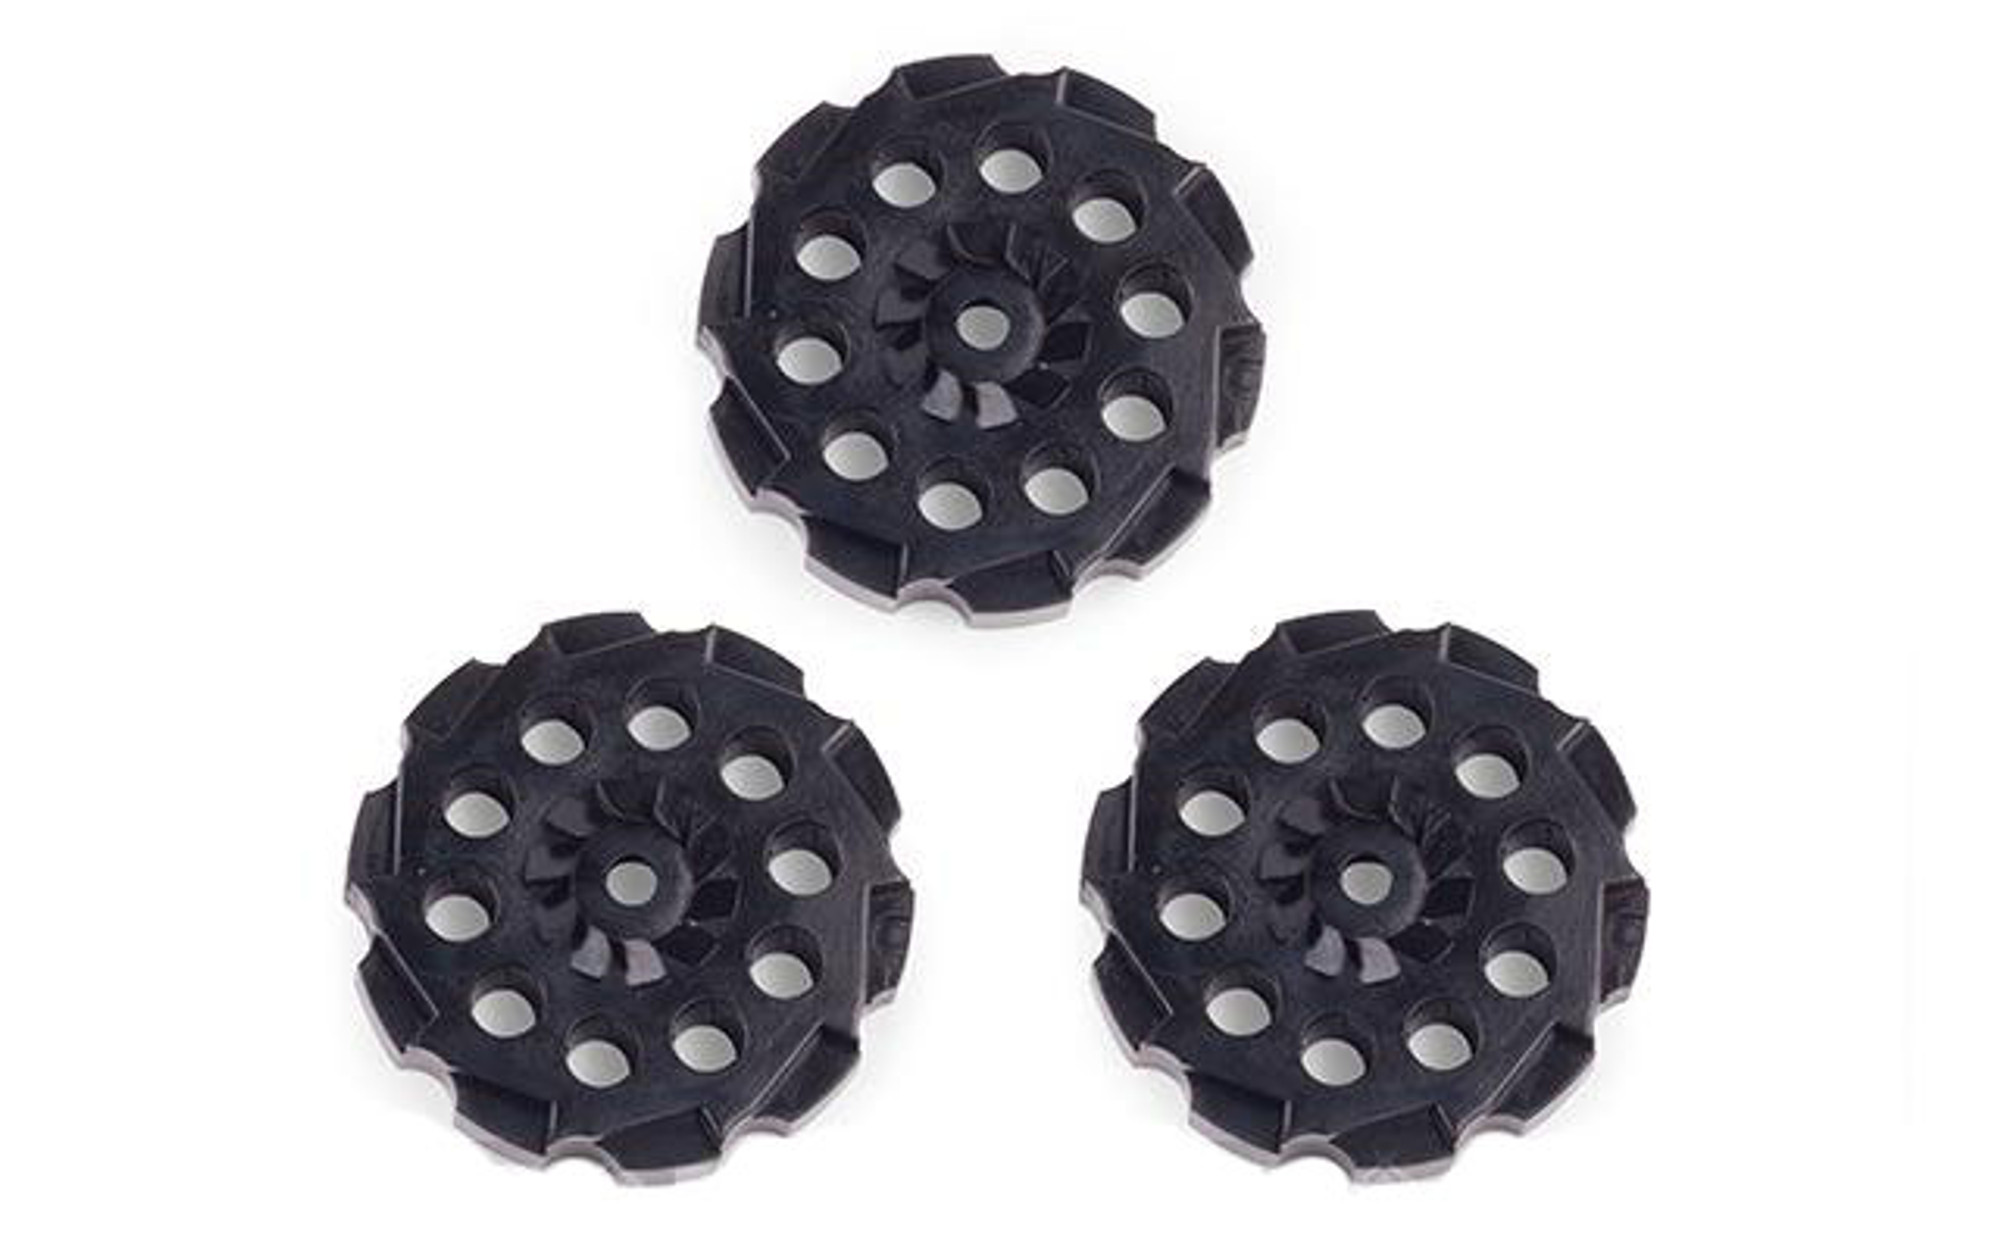 Crosman Spare Pellet Clips for Vigilante & 357 CO2 Powered Airgun Revolvers (FOR AIRGUN USE ONLY) - Set of 3